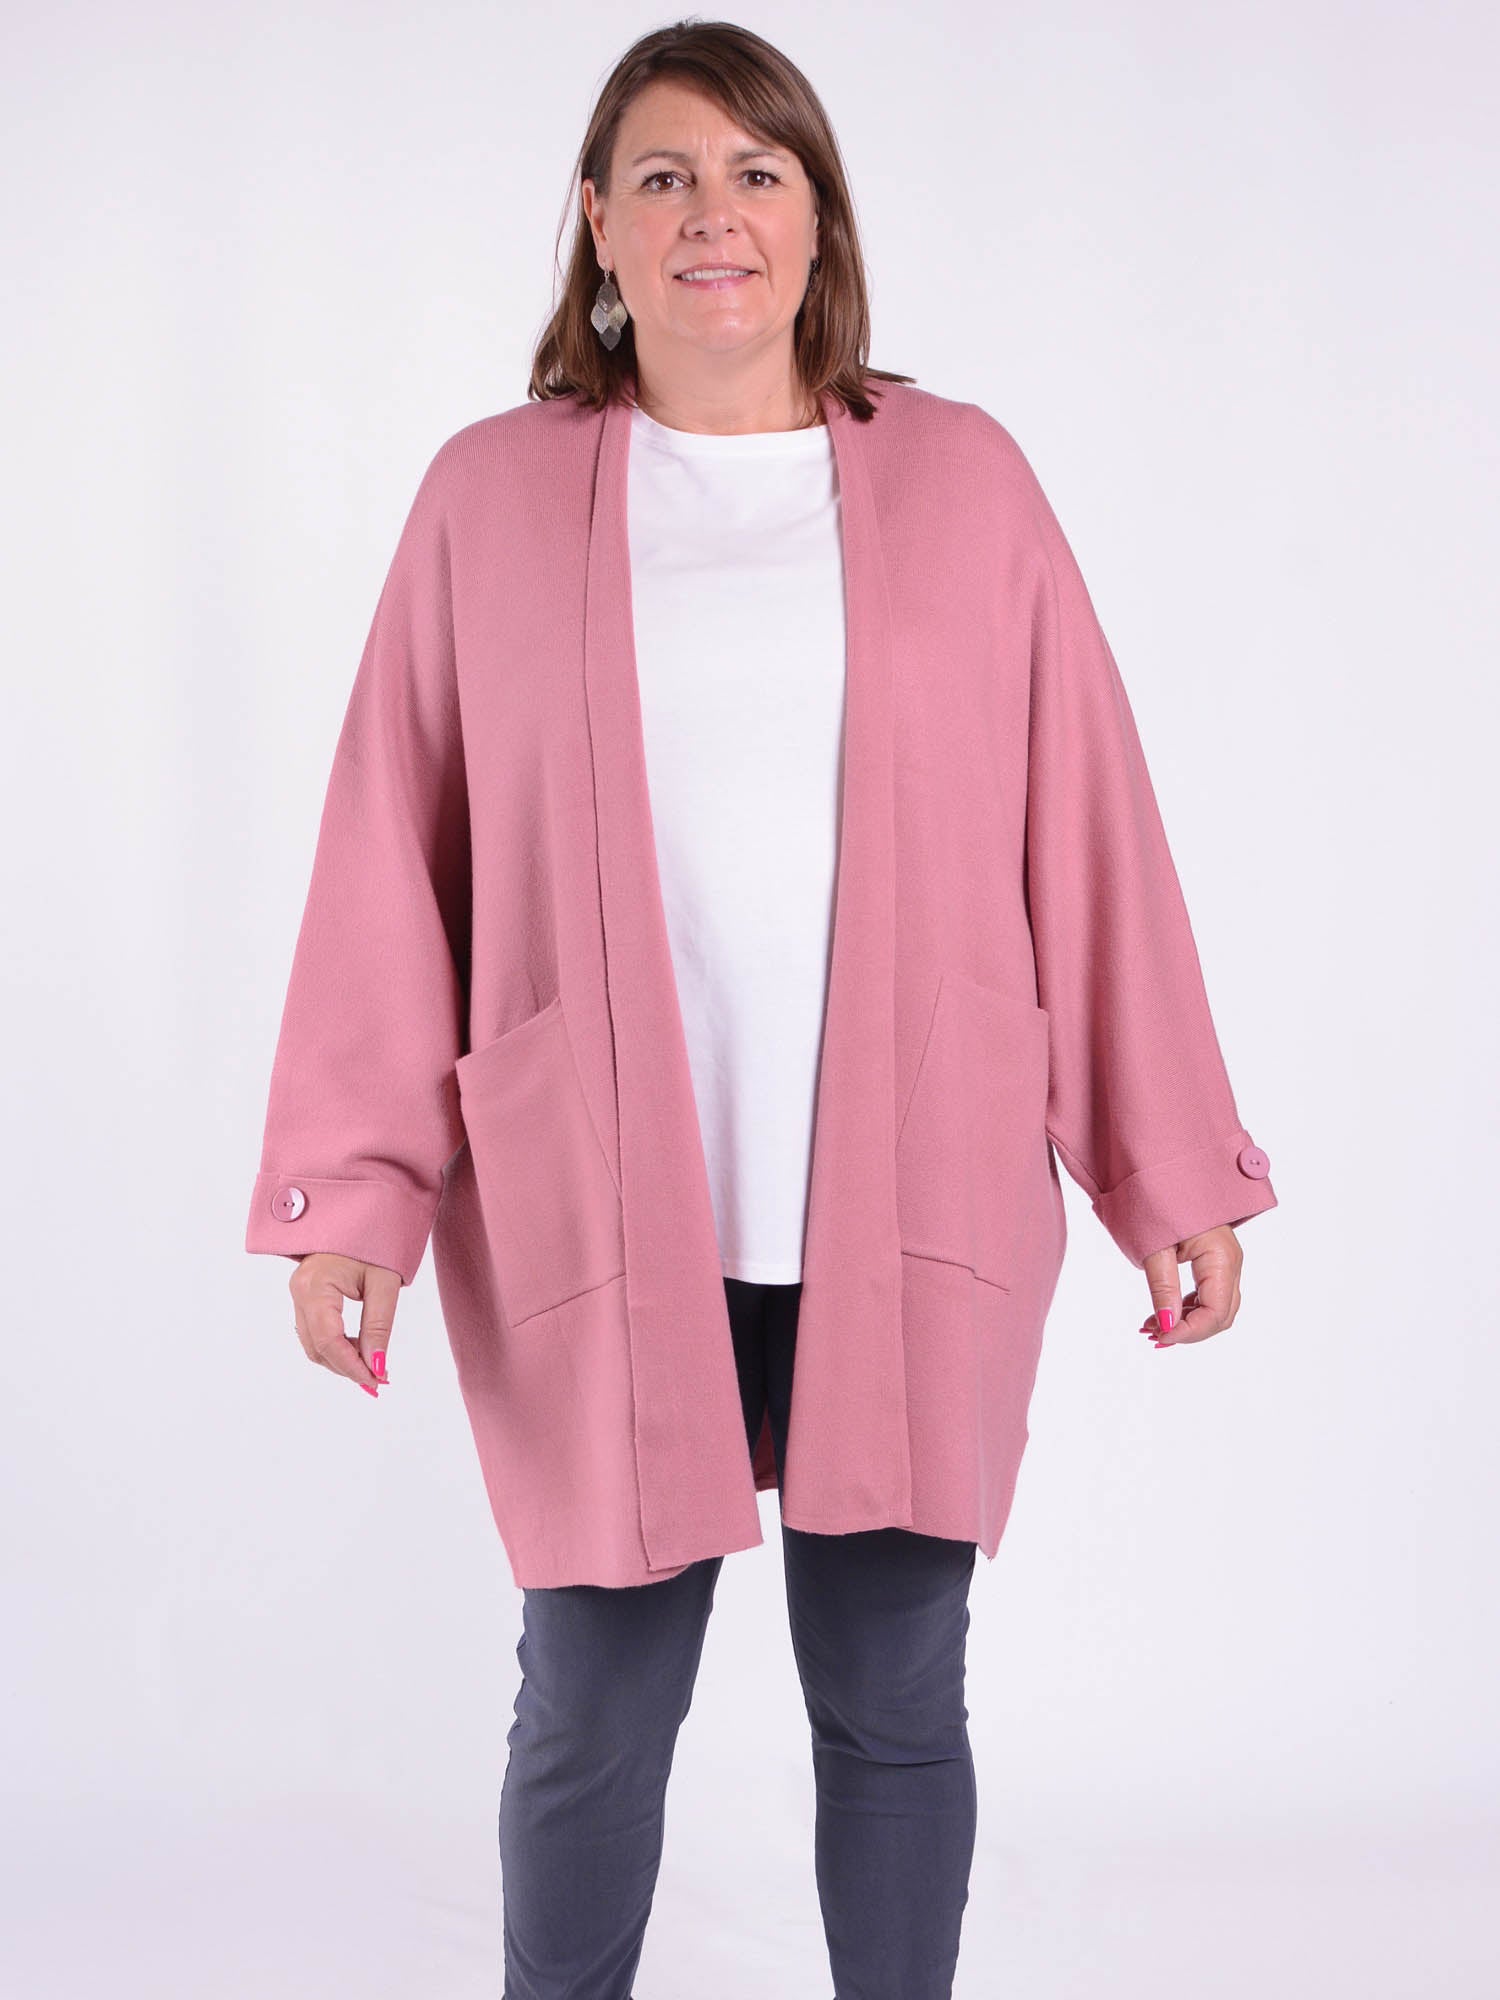 Lagenlook Open Front Cardigan - C2, Jumpers & Cardigans, Pure Plus Clothing, Lagenlook Clothing, Plus Size Fashion, Over 50 Fashion